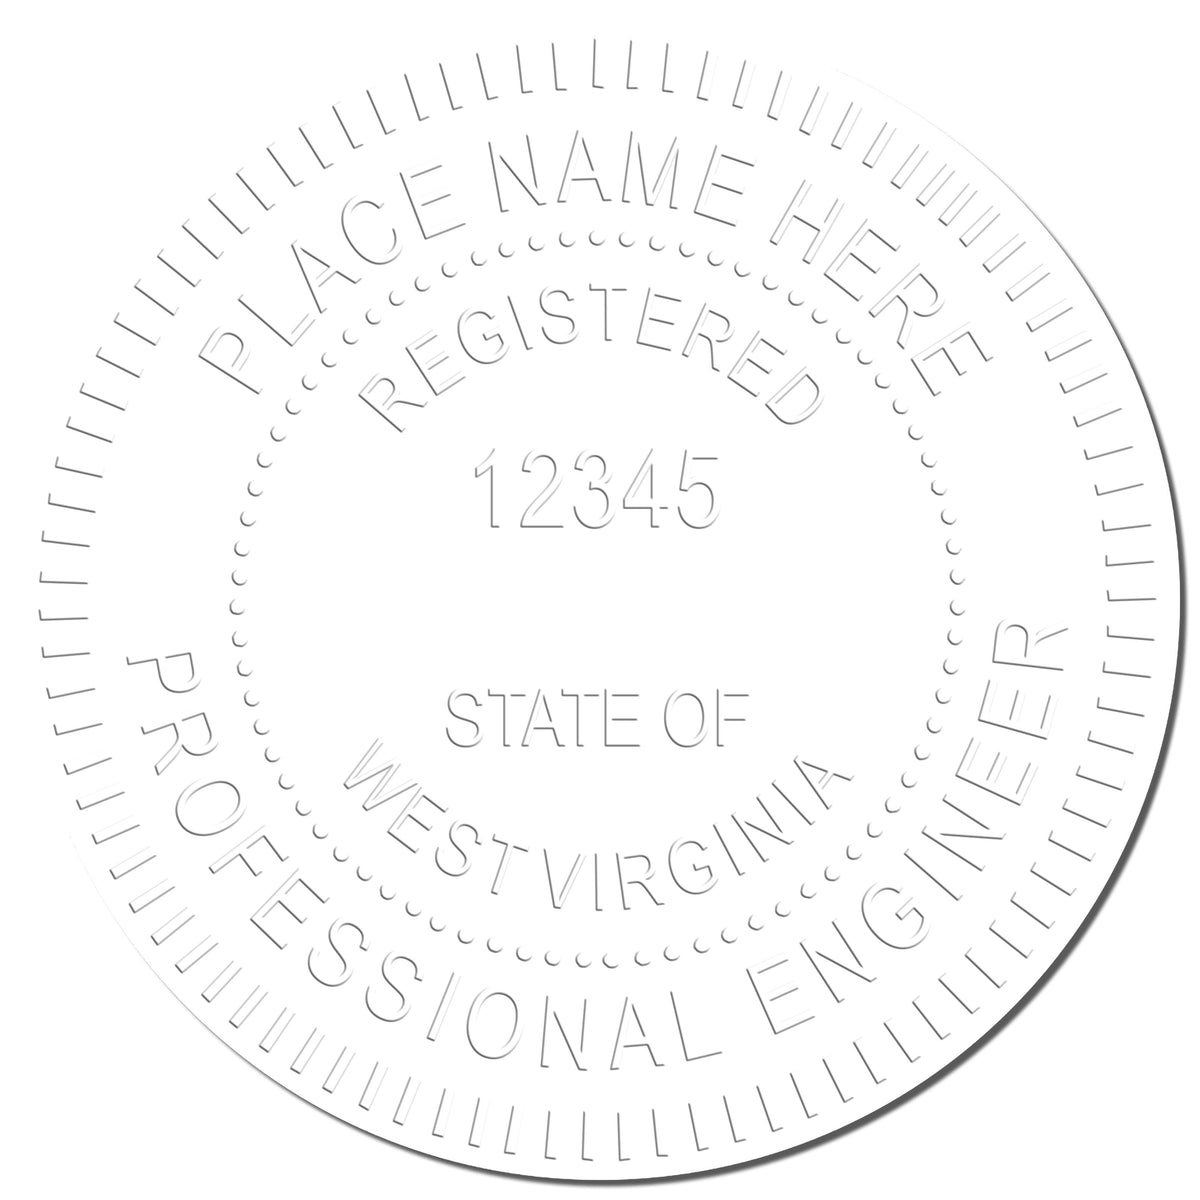 A photograph of the Handheld West Virginia Professional Engineer Embosser stamp impression reveals a vivid, professional image of the on paper.